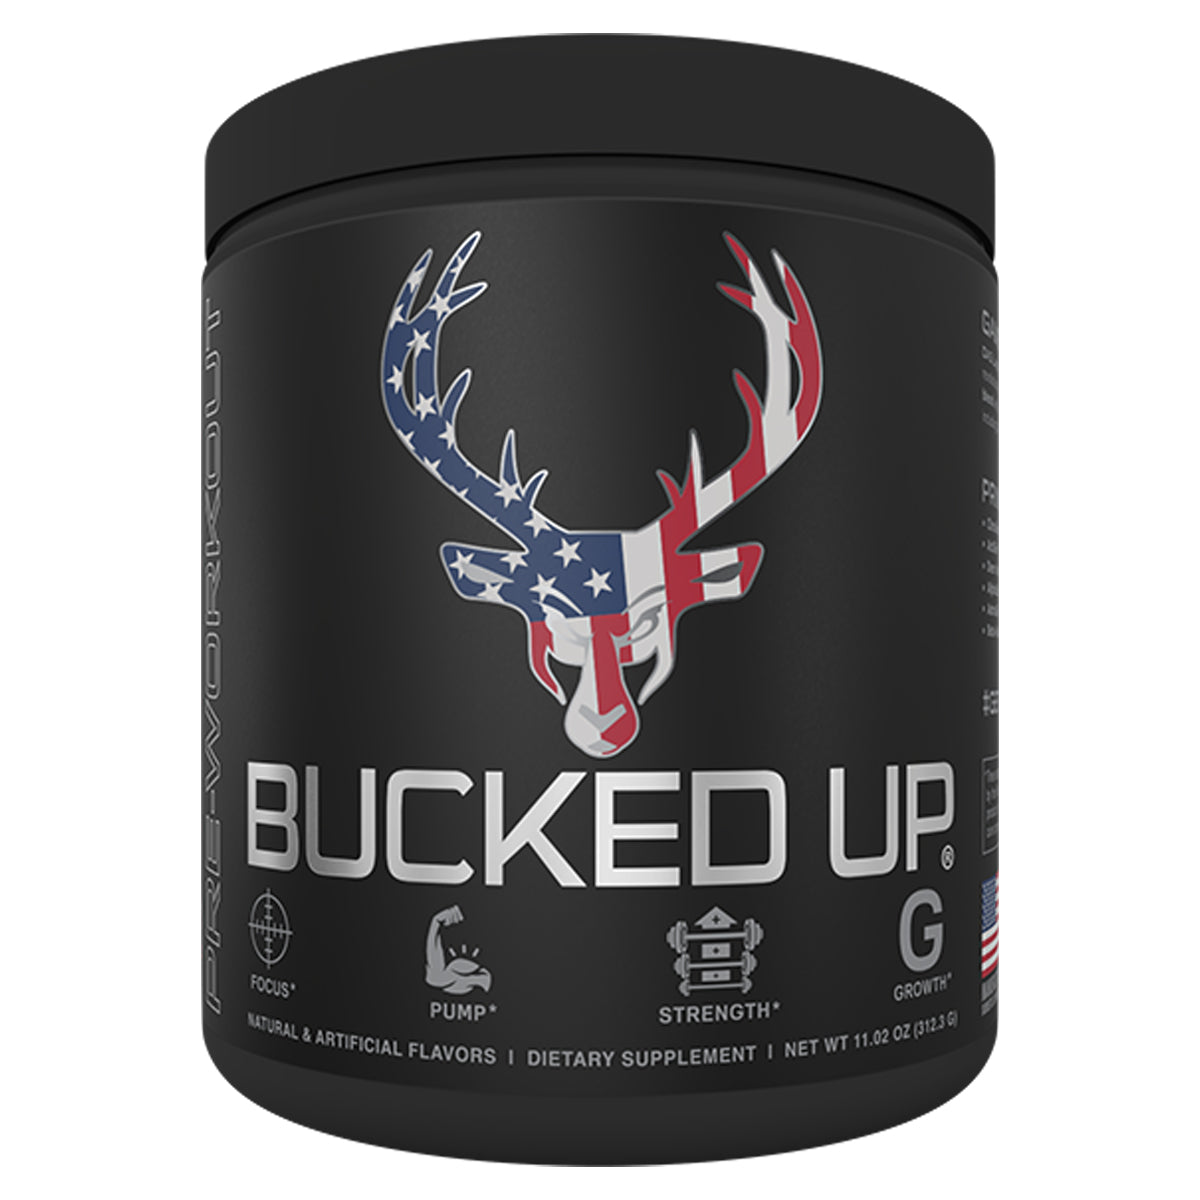 Bucked Up Pre-Workout in  by GOHUNT | Bucked Up - GOHUNT Shop